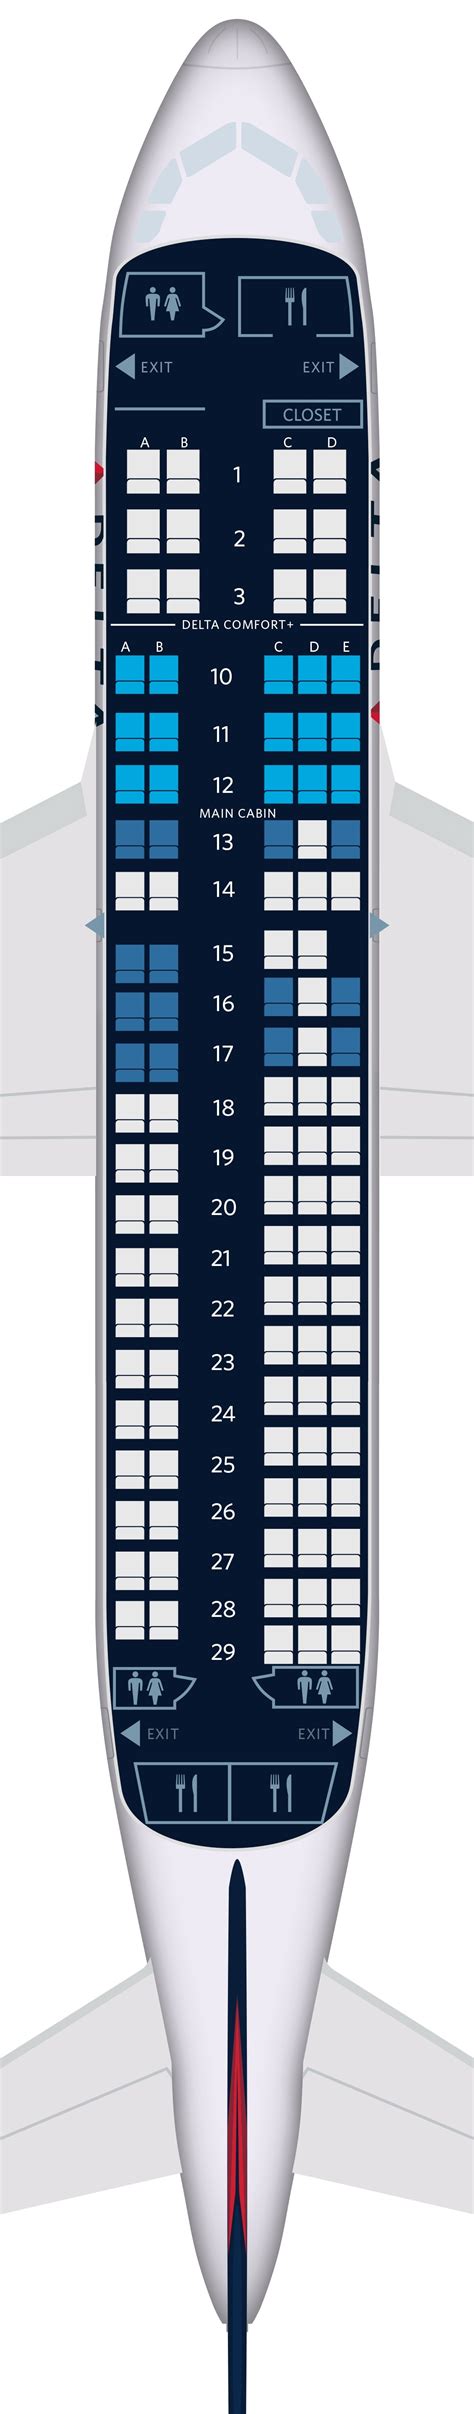 Airbus a220 100 seat map. Dec 21, 2018 ... Emerald A220-100 Seat Map. Used mostly on regional flights. Last of the seat maps. Emerald A321neo UPDATED; Emerald a319neo seatmap ... 